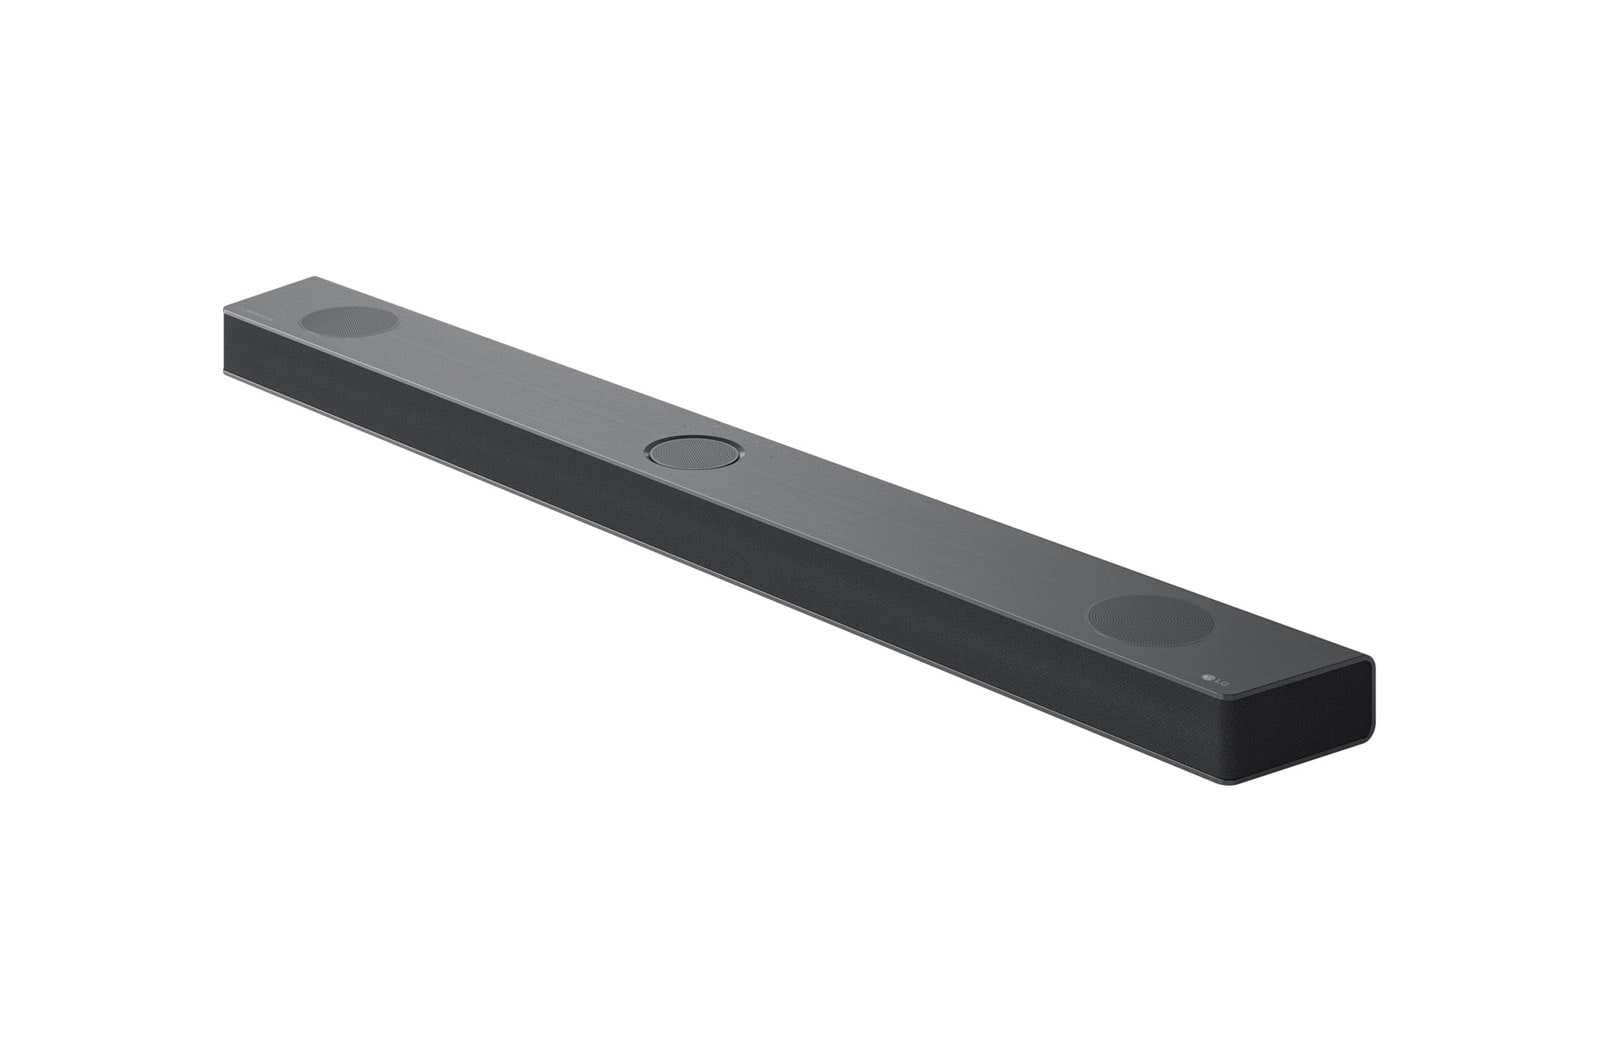 LG S95QR 9.1.5 Wireless Sound Bar with Dolby Atmos - Refurbished Excellent - NO SUBWOOFER